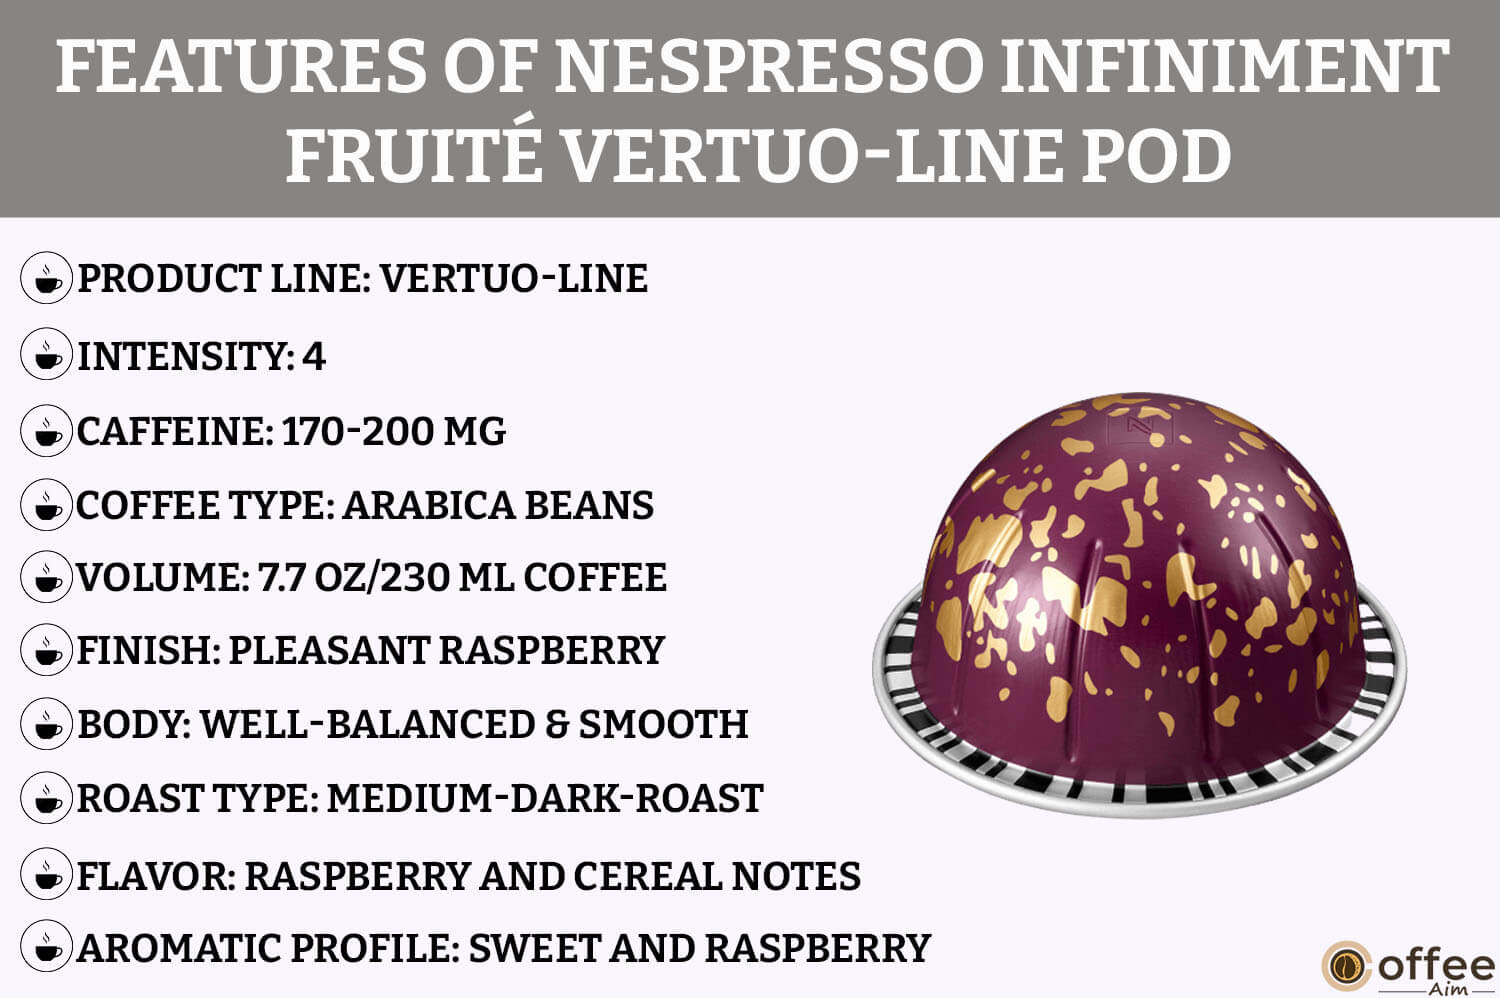 This image illustrates the "Features" of the VertuoLine Infiniment Fruite Pod for our Nespresso Vertuo Infiniment Fruite Pod Review article.